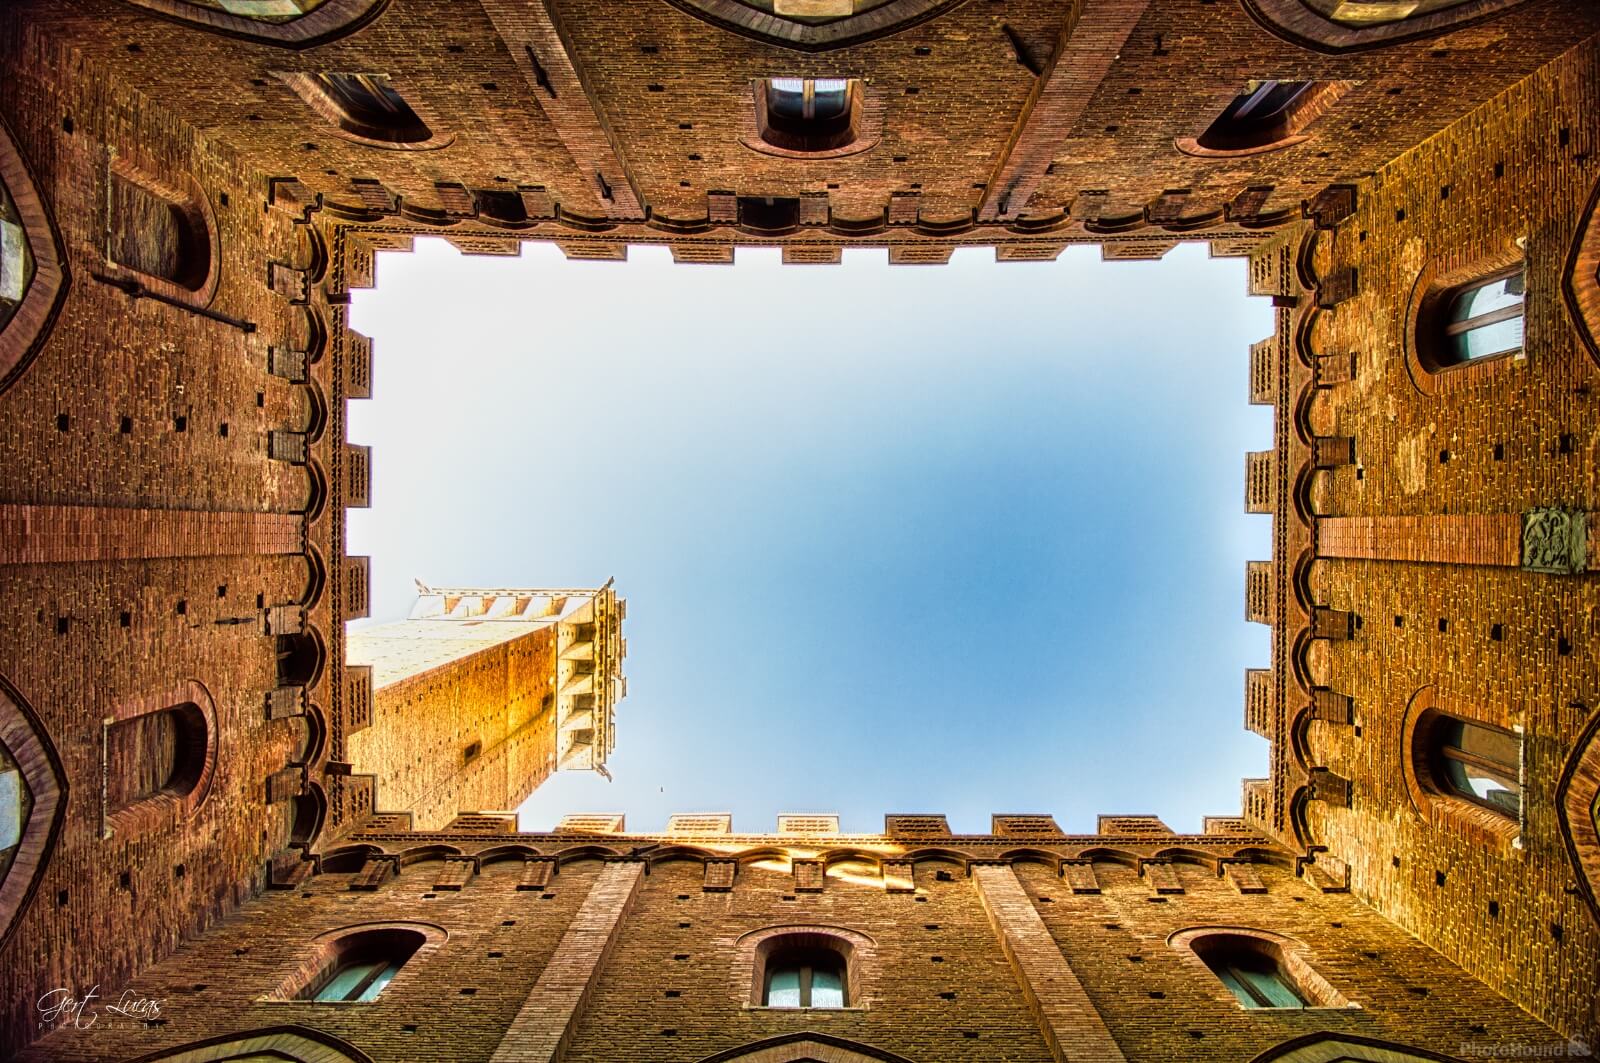 Image of Siena, Pubblico Palace (view up) by Gert Lucas